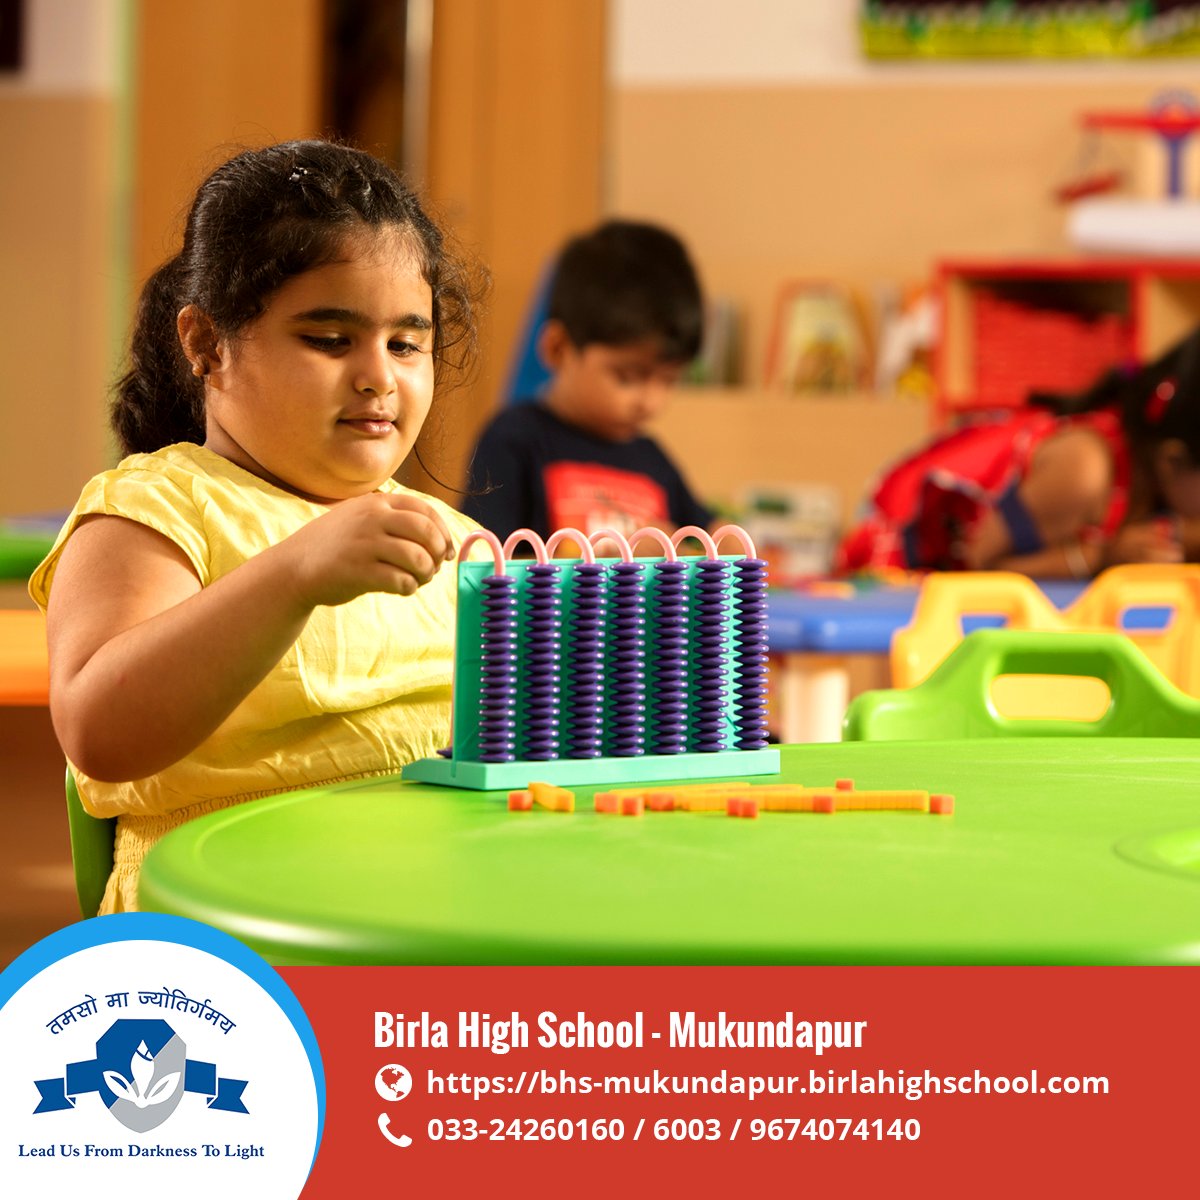 #Cognitiveskill development is crucial to improve #attention, #memory and #thinking. At #bhsmukundapur, we pay special attention to cognitive skill development so that the #children start processing all information and are able to evaluate and analyze them at an early stage. .